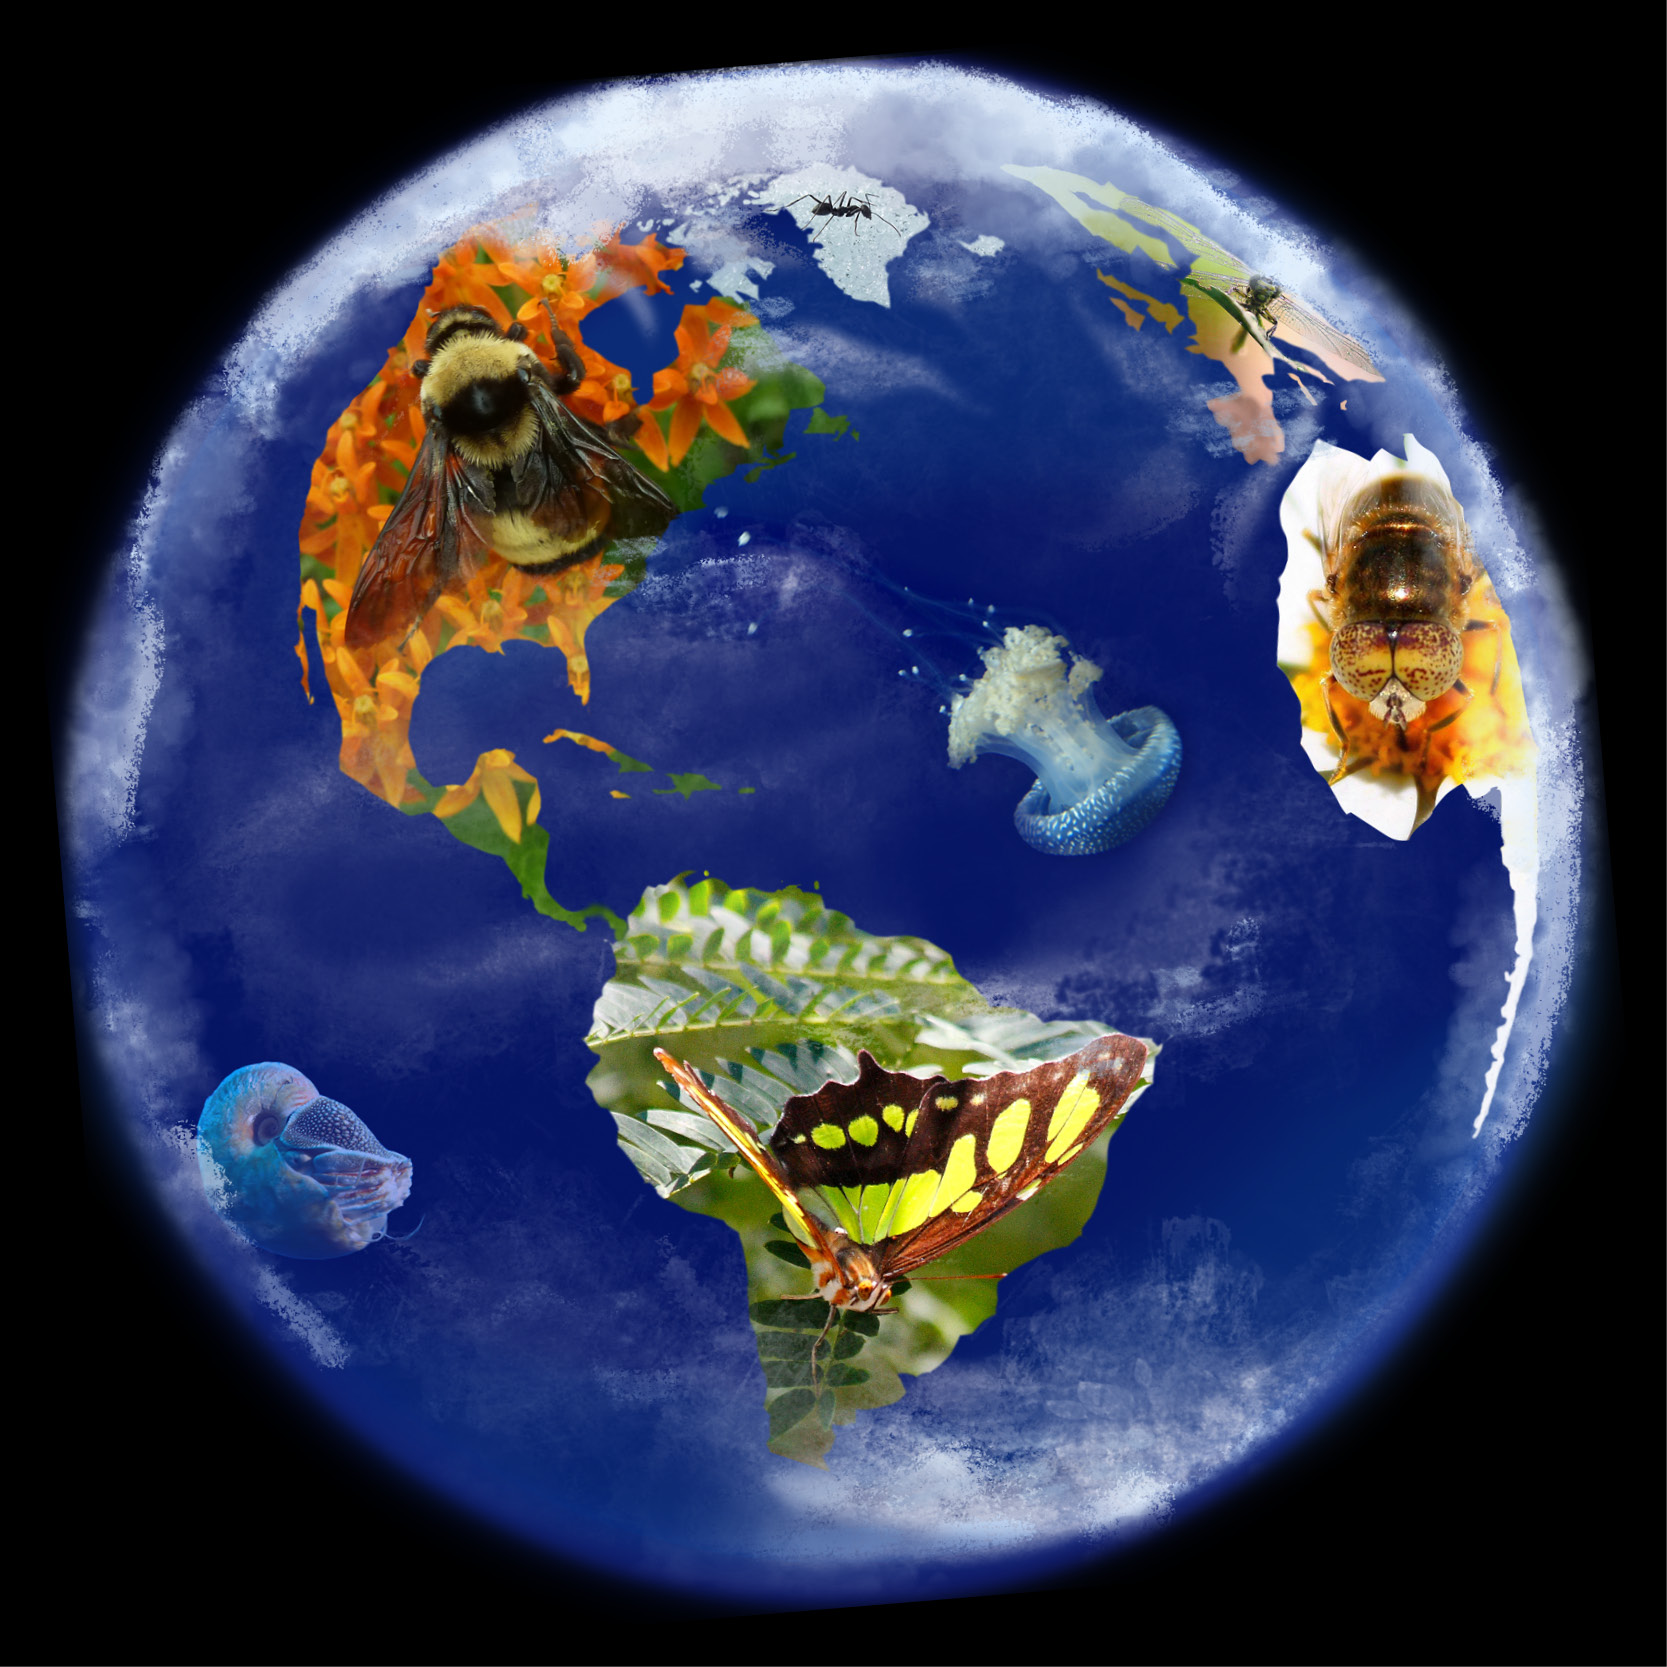 A globe with images of invertebrates, including a bumble bee on North America, and a butterfly on South America, that are photoshopped into the continents and oceans.